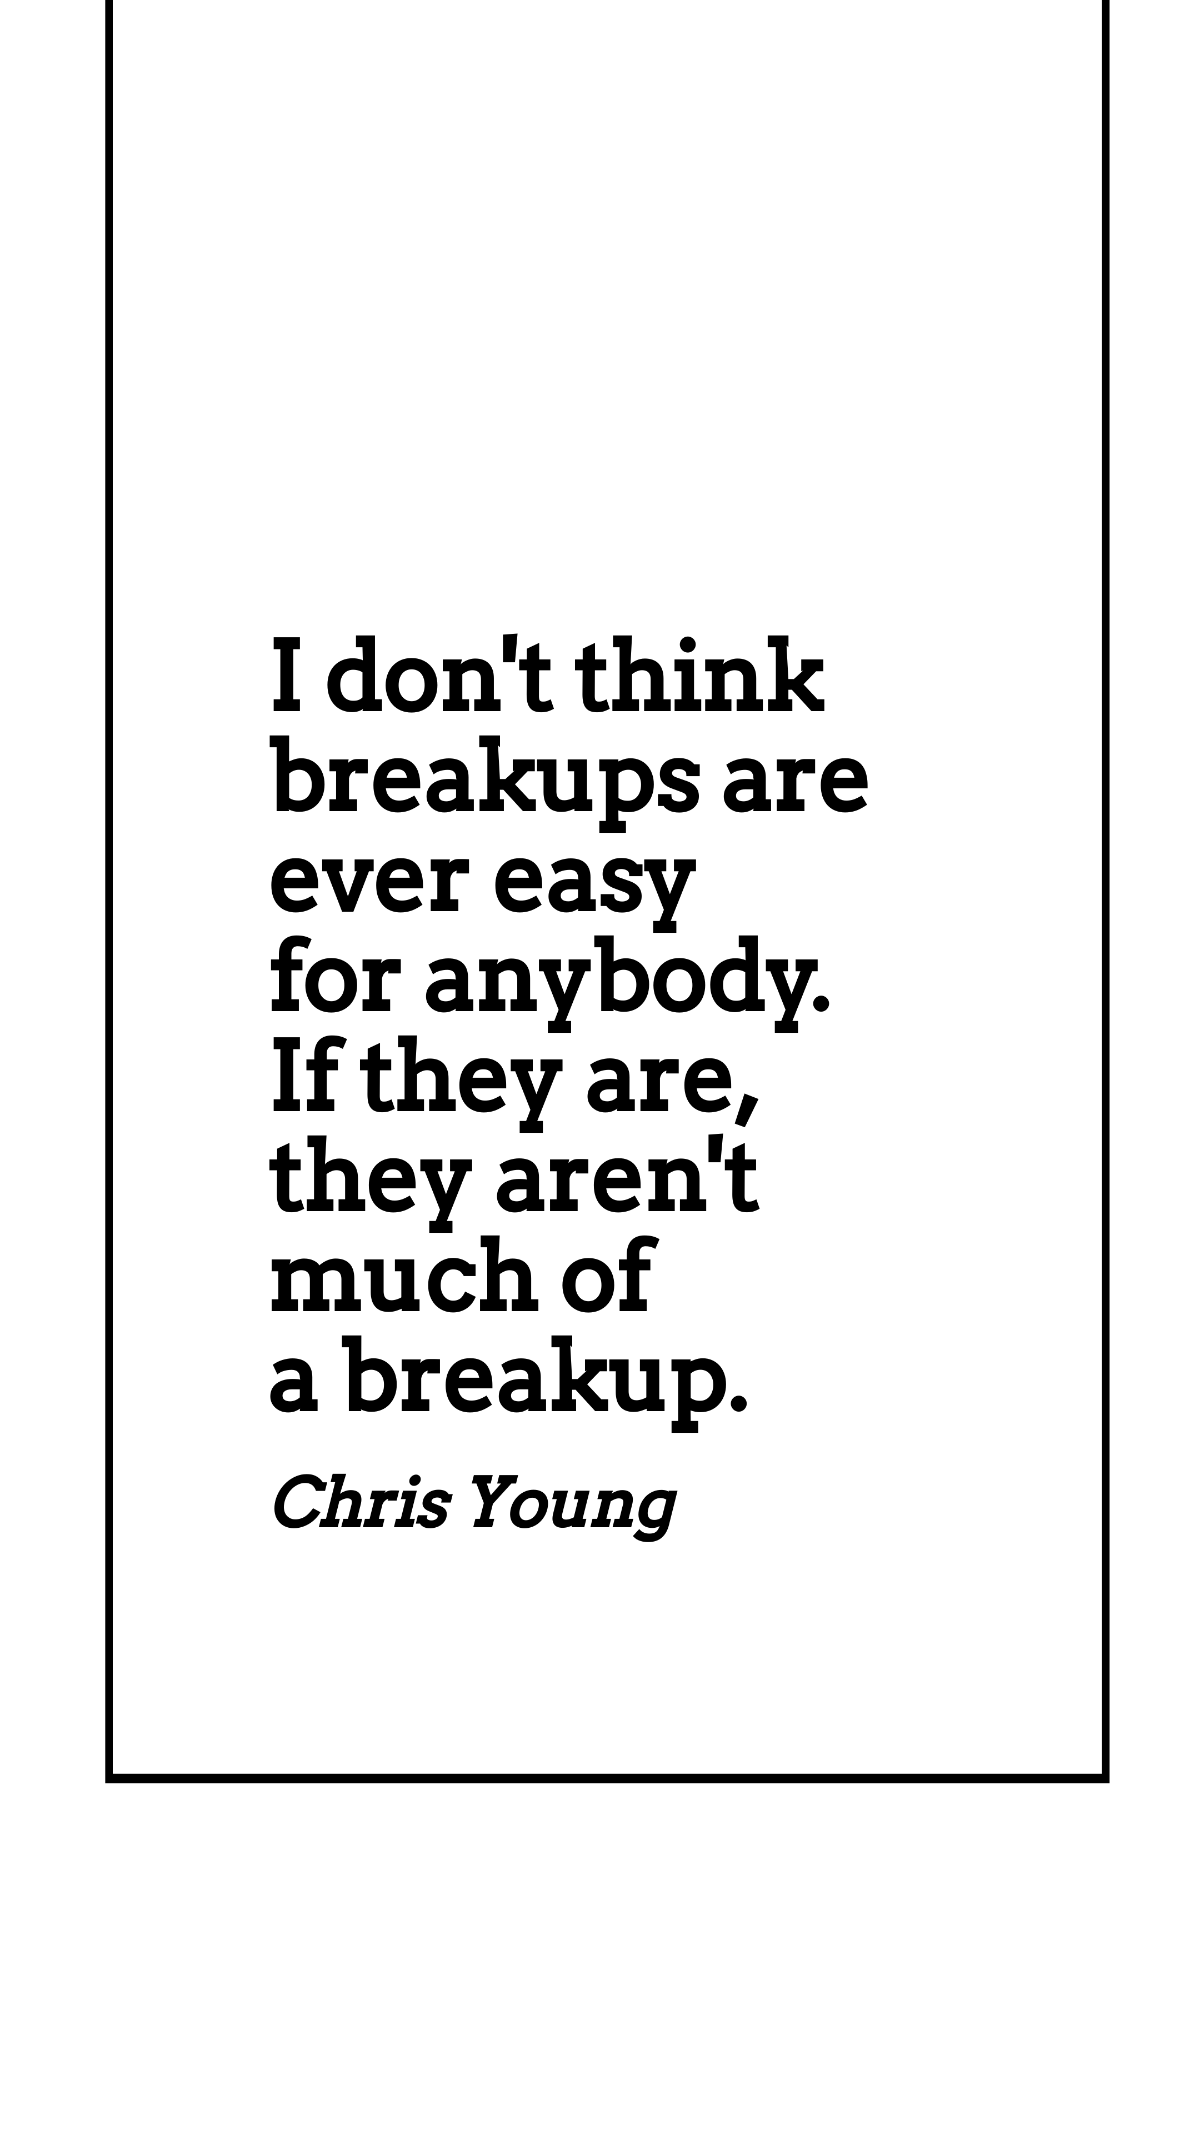 Free Chris Young - I don't think breakups are ever easy for anybody. If they are, they aren't much of a breakup. Template